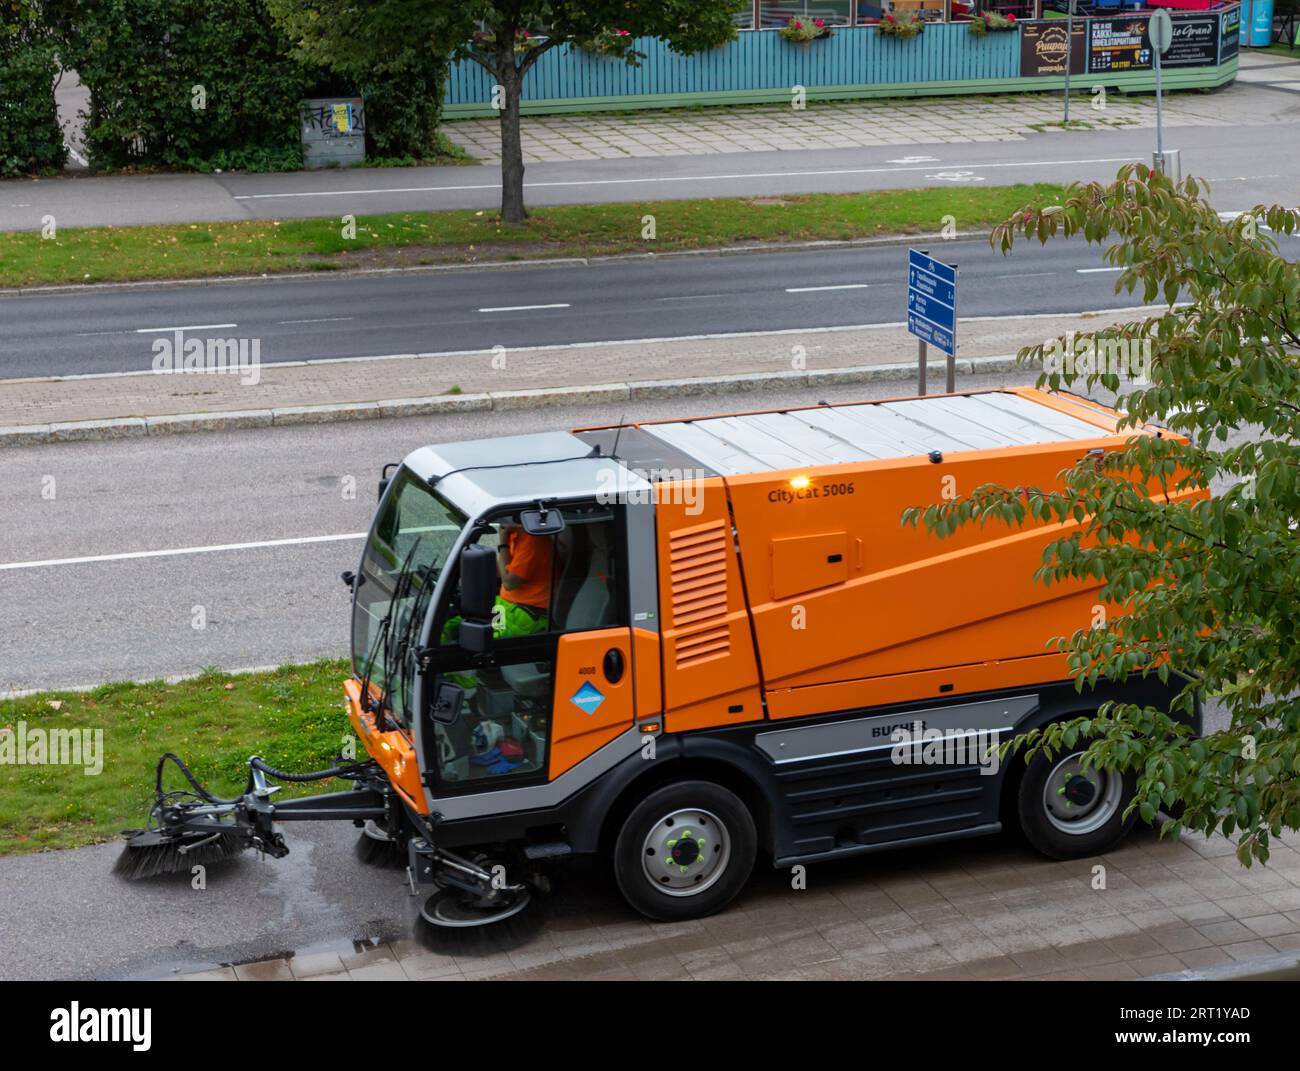 A Bucher Citycat 5006 sweeper, operated by the city of Vantaa, cleaning a sidewalk in Talvikkitie. Stock Photo